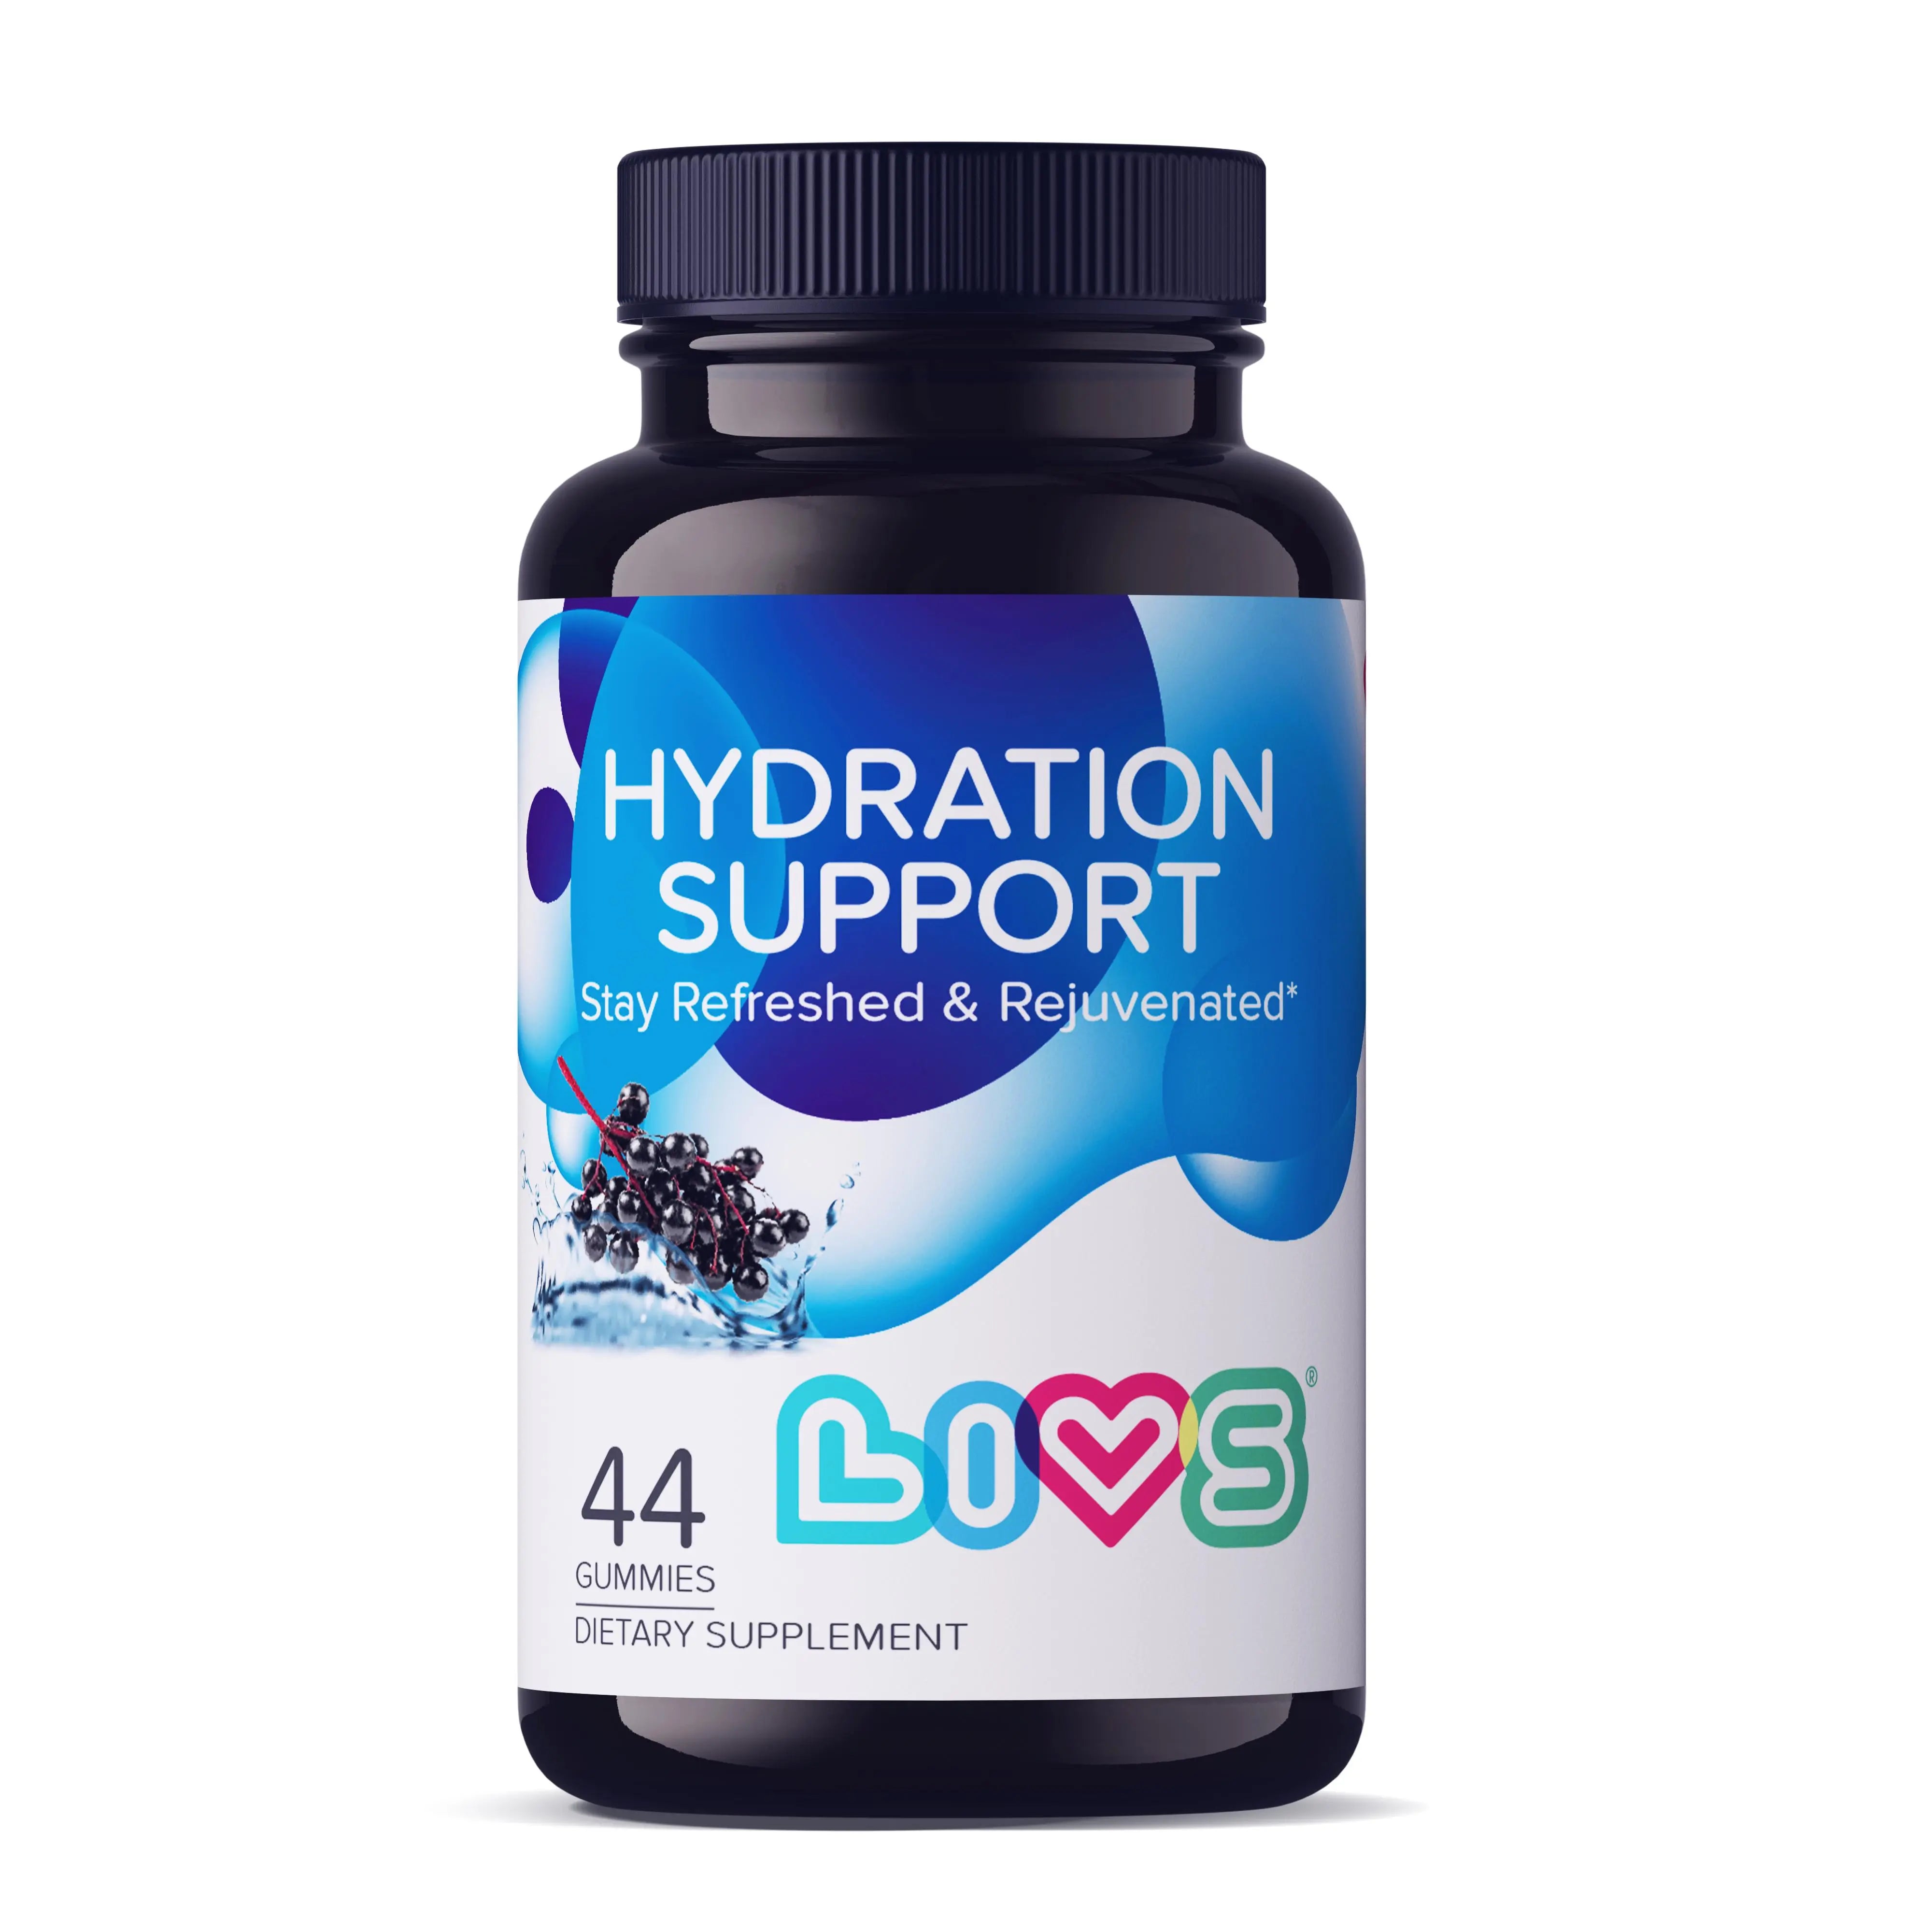 Hydration Support Gummies LIVS